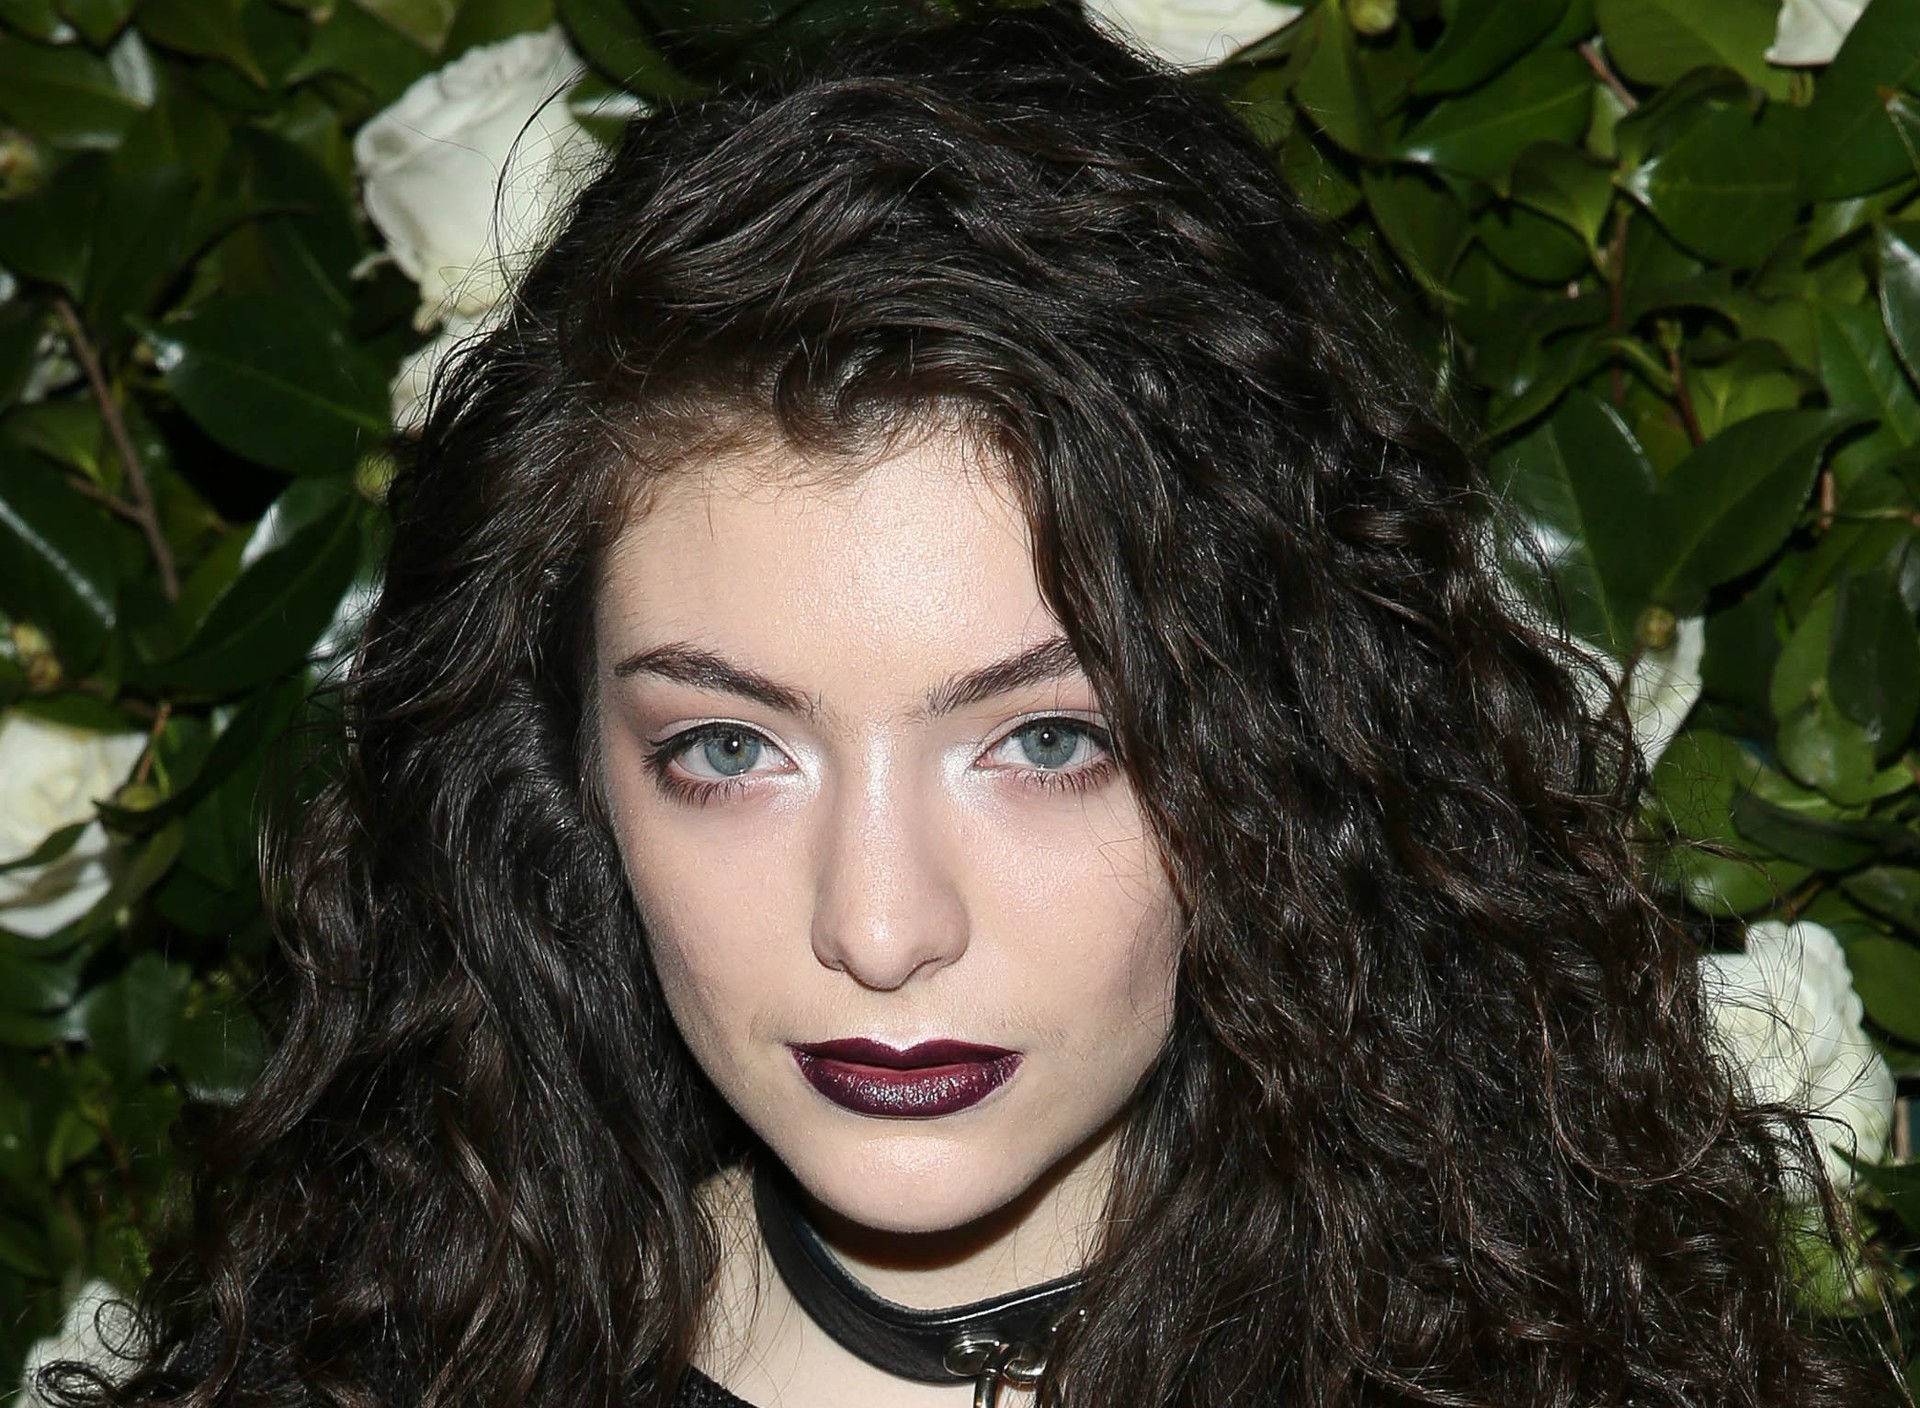 A cantora neozelandesa Lorde. (Foto: Getty Images)